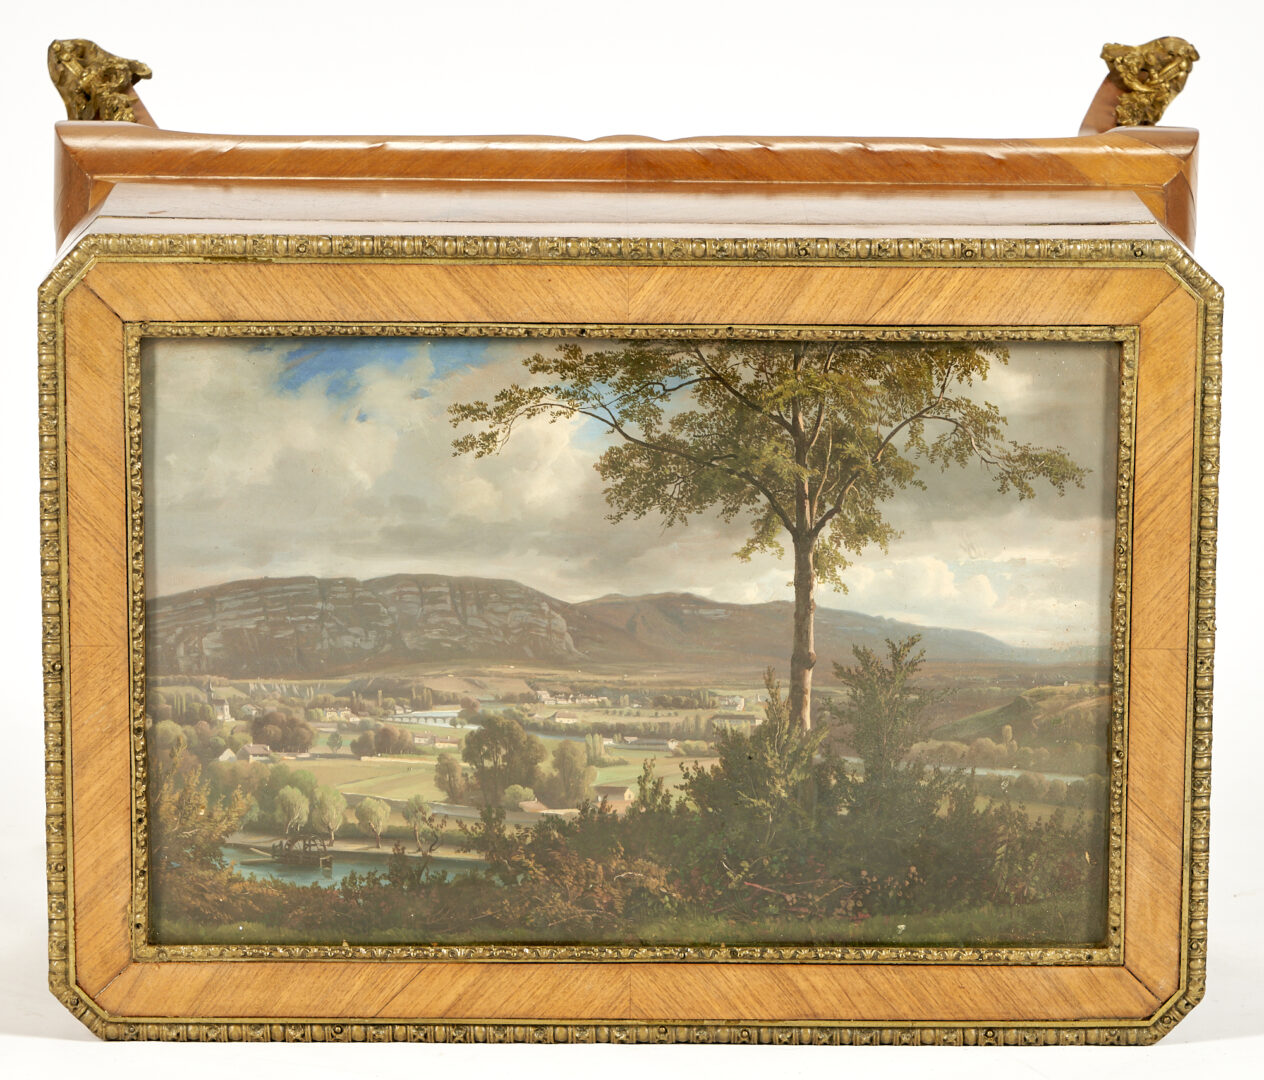 Lot 350: French Sewing Box on Stand w/ Painted Scenic Lid